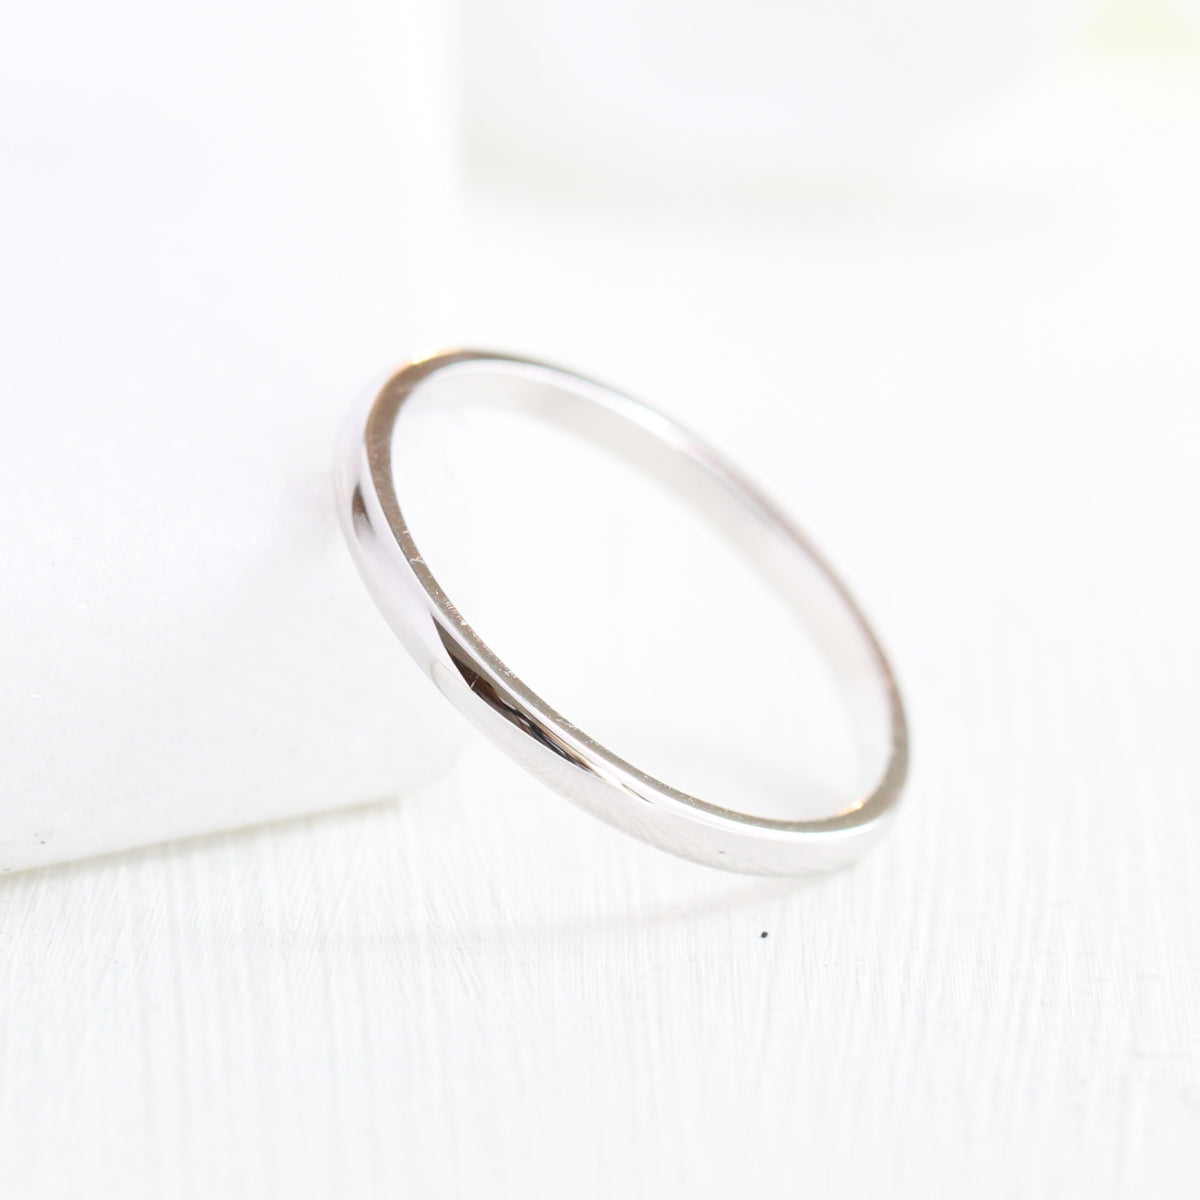 Plain gold wedding band solid 14k white gold ring by la more design jewelry